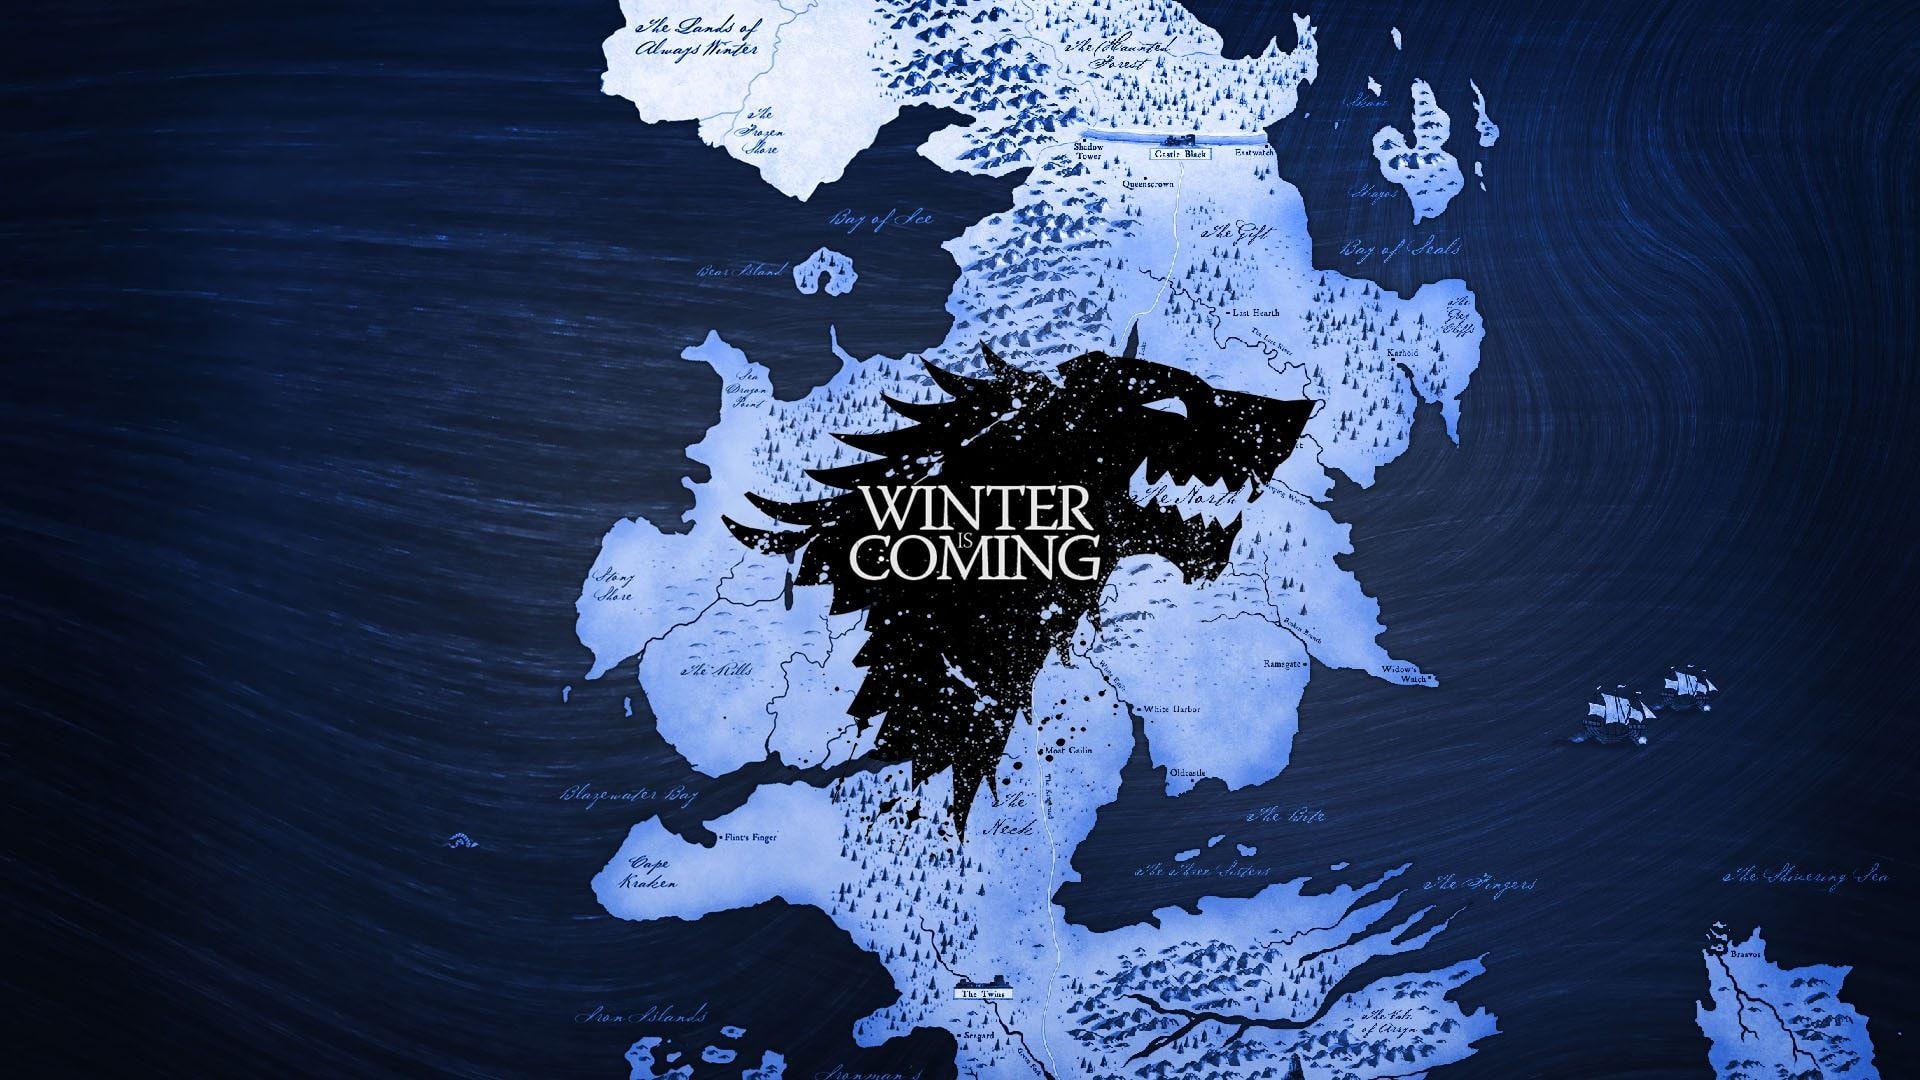 Game of thrones map Wallpaper and Free. Visual